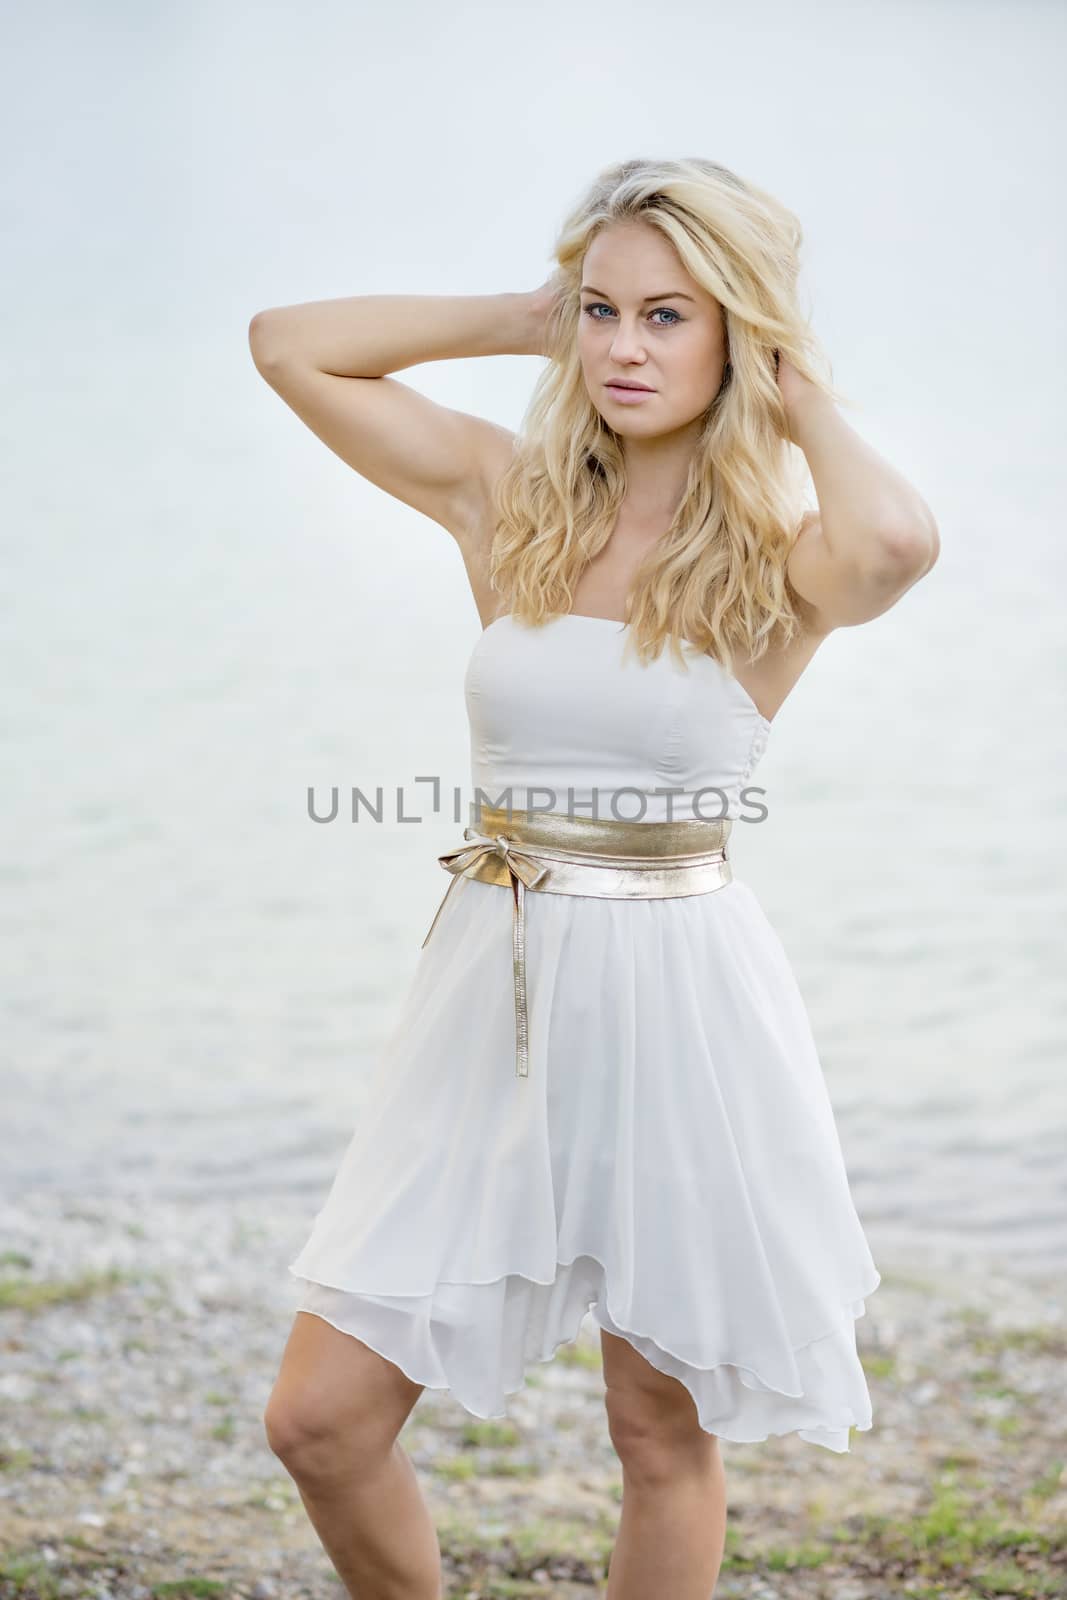 Blond young woman standing on the edge of a lake